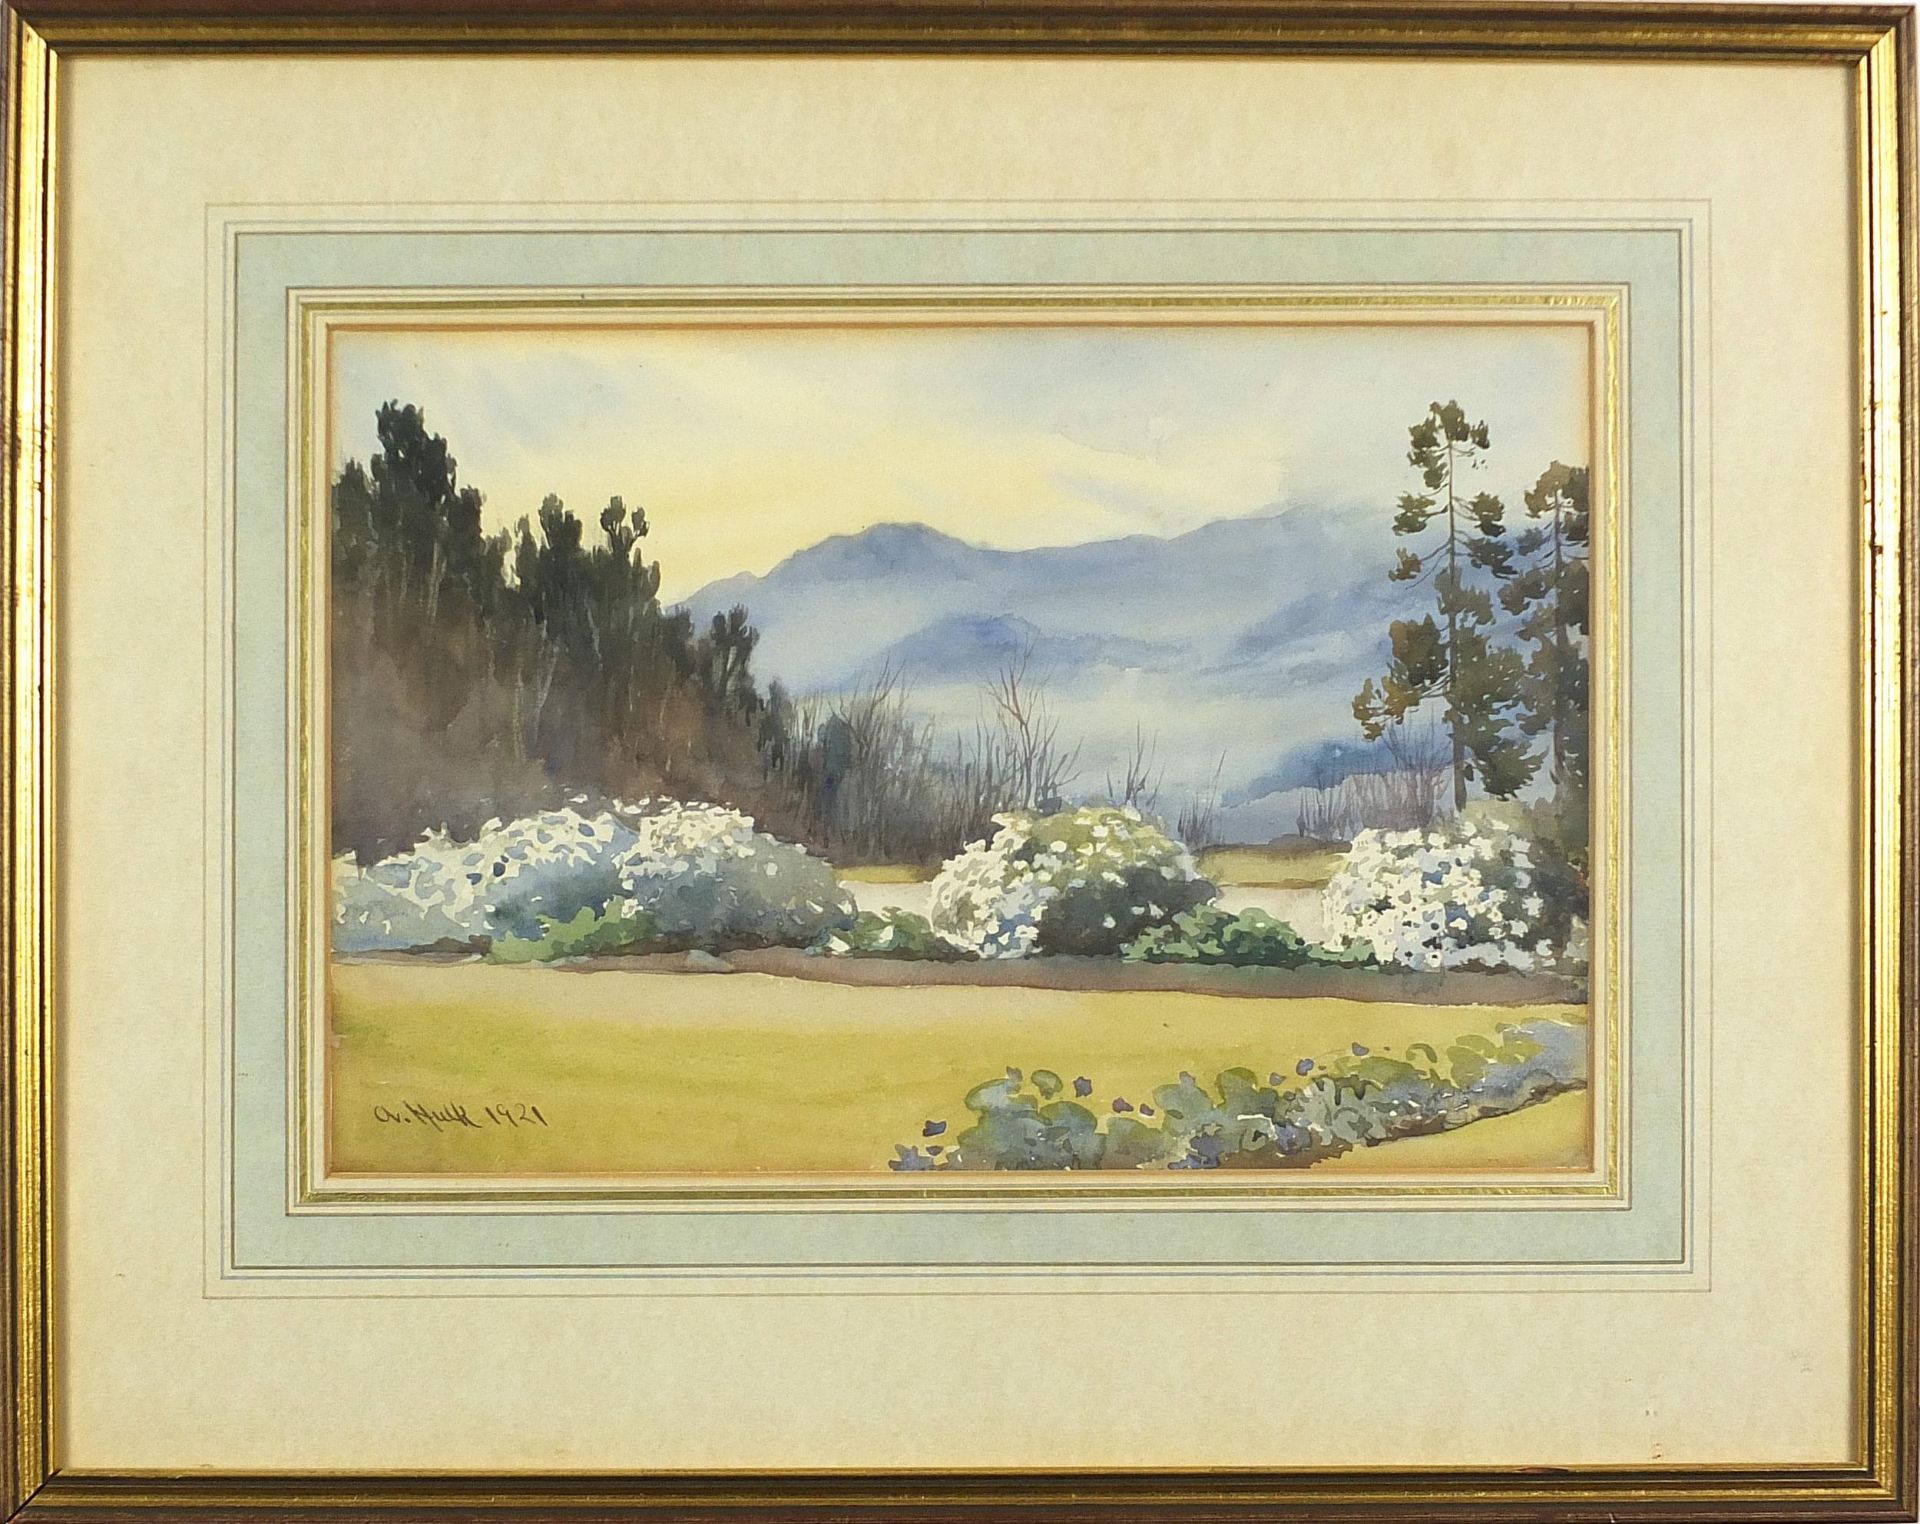 Abraham II Hulk 1921 - Mountainous landscape with trees, early 20th century watercolour, mounted, - Image 2 of 4